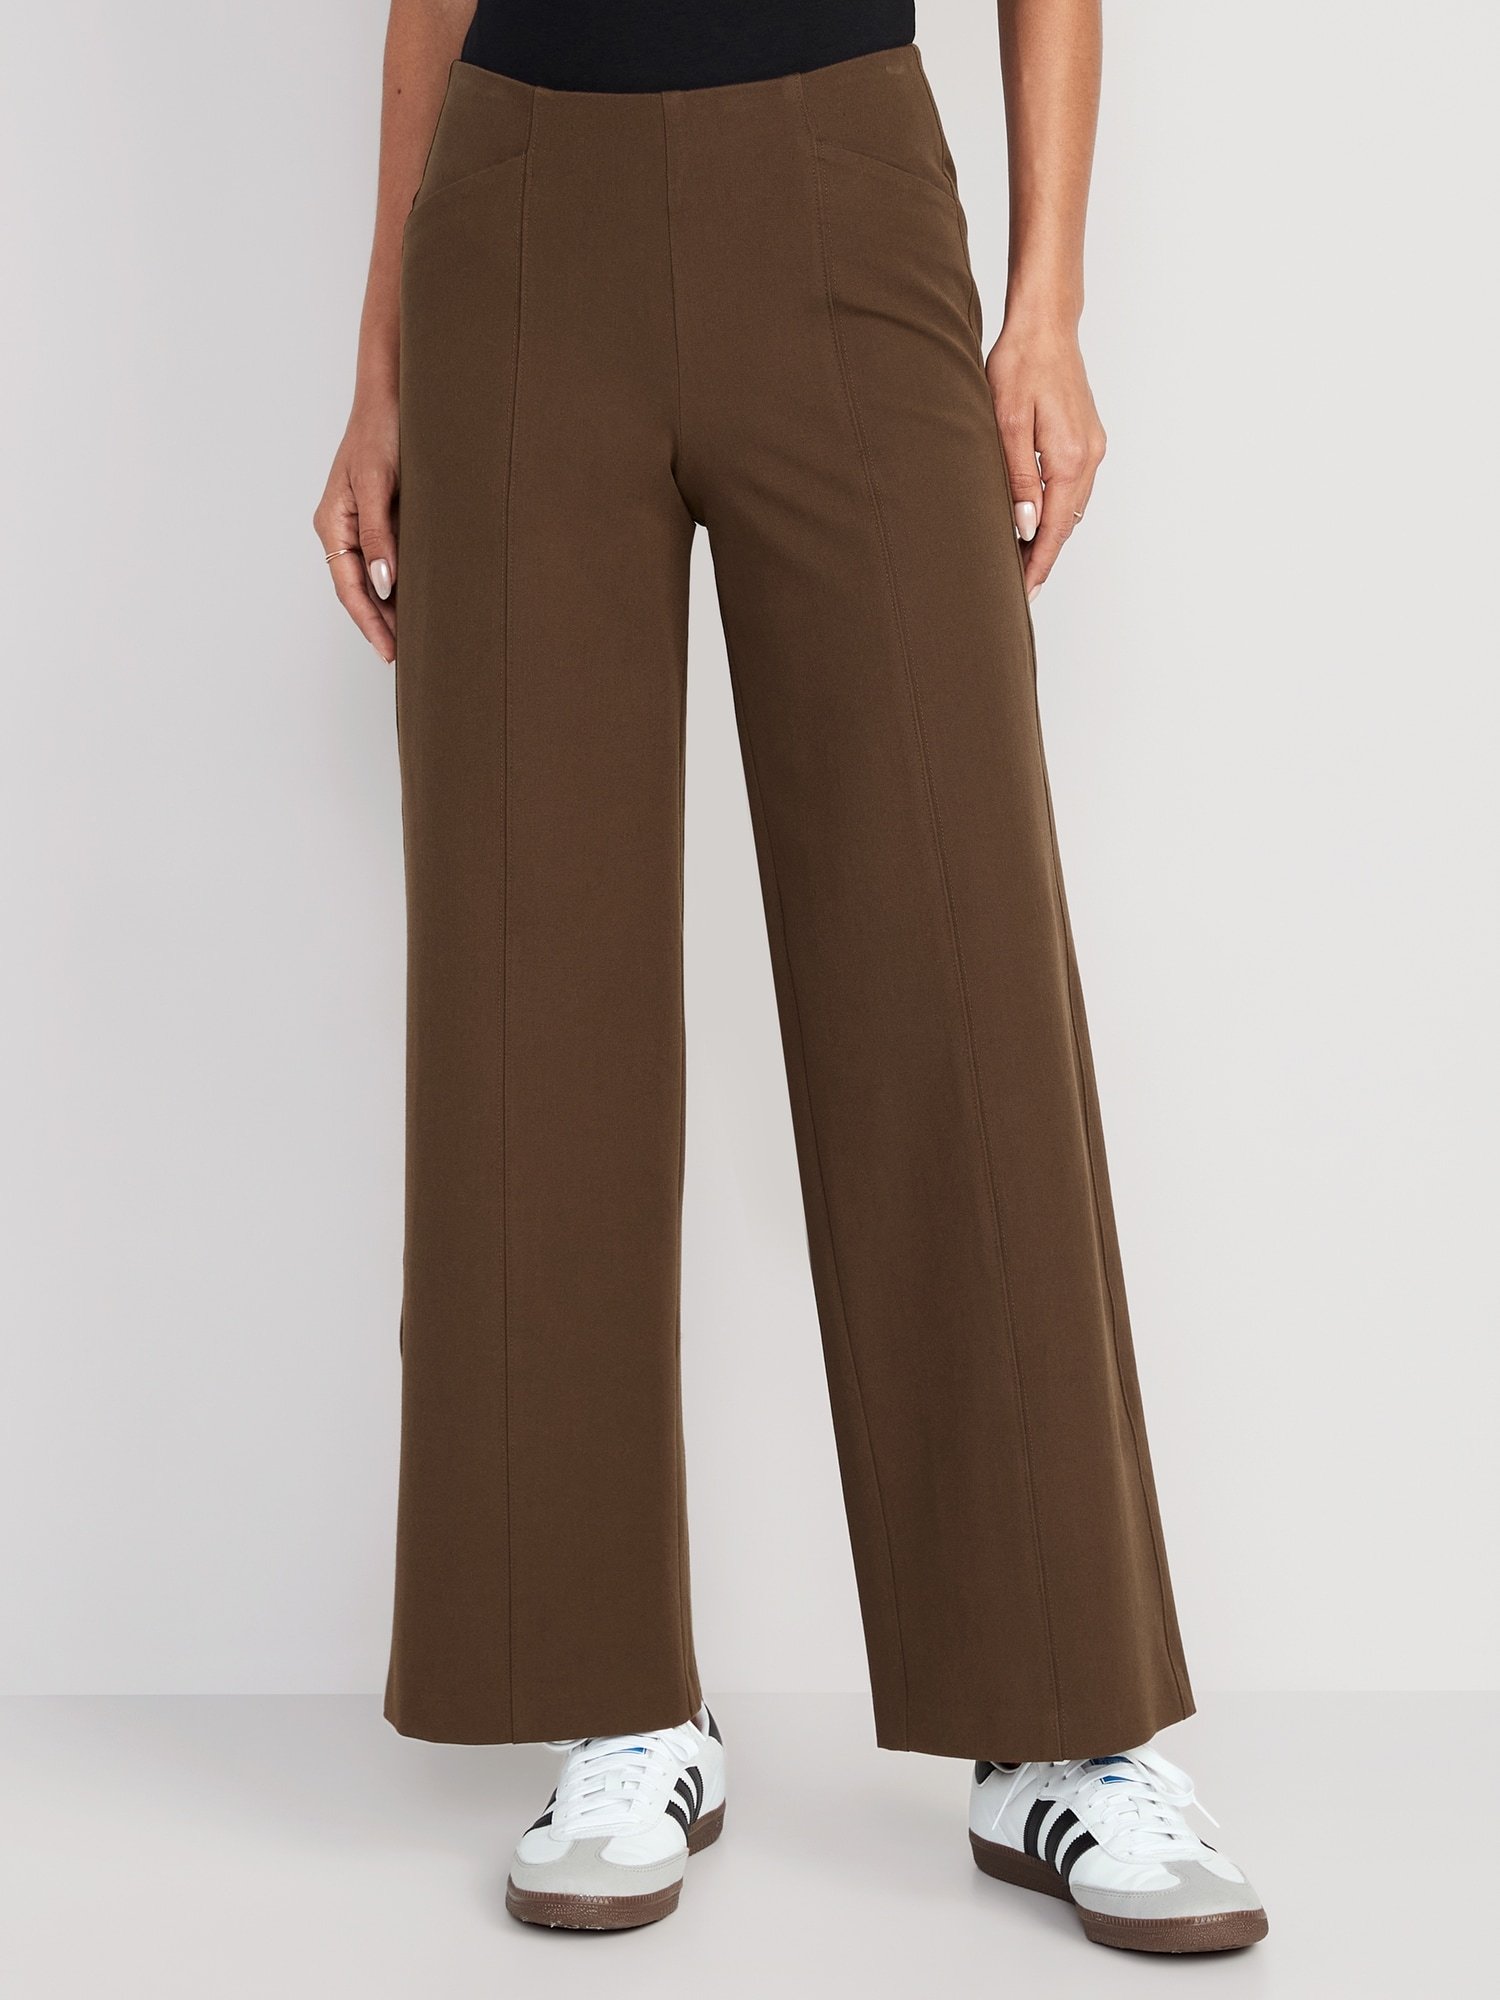 High-Waisted Pull-On Pixie Wide-Leg Pants for Women P2,950.jpeg